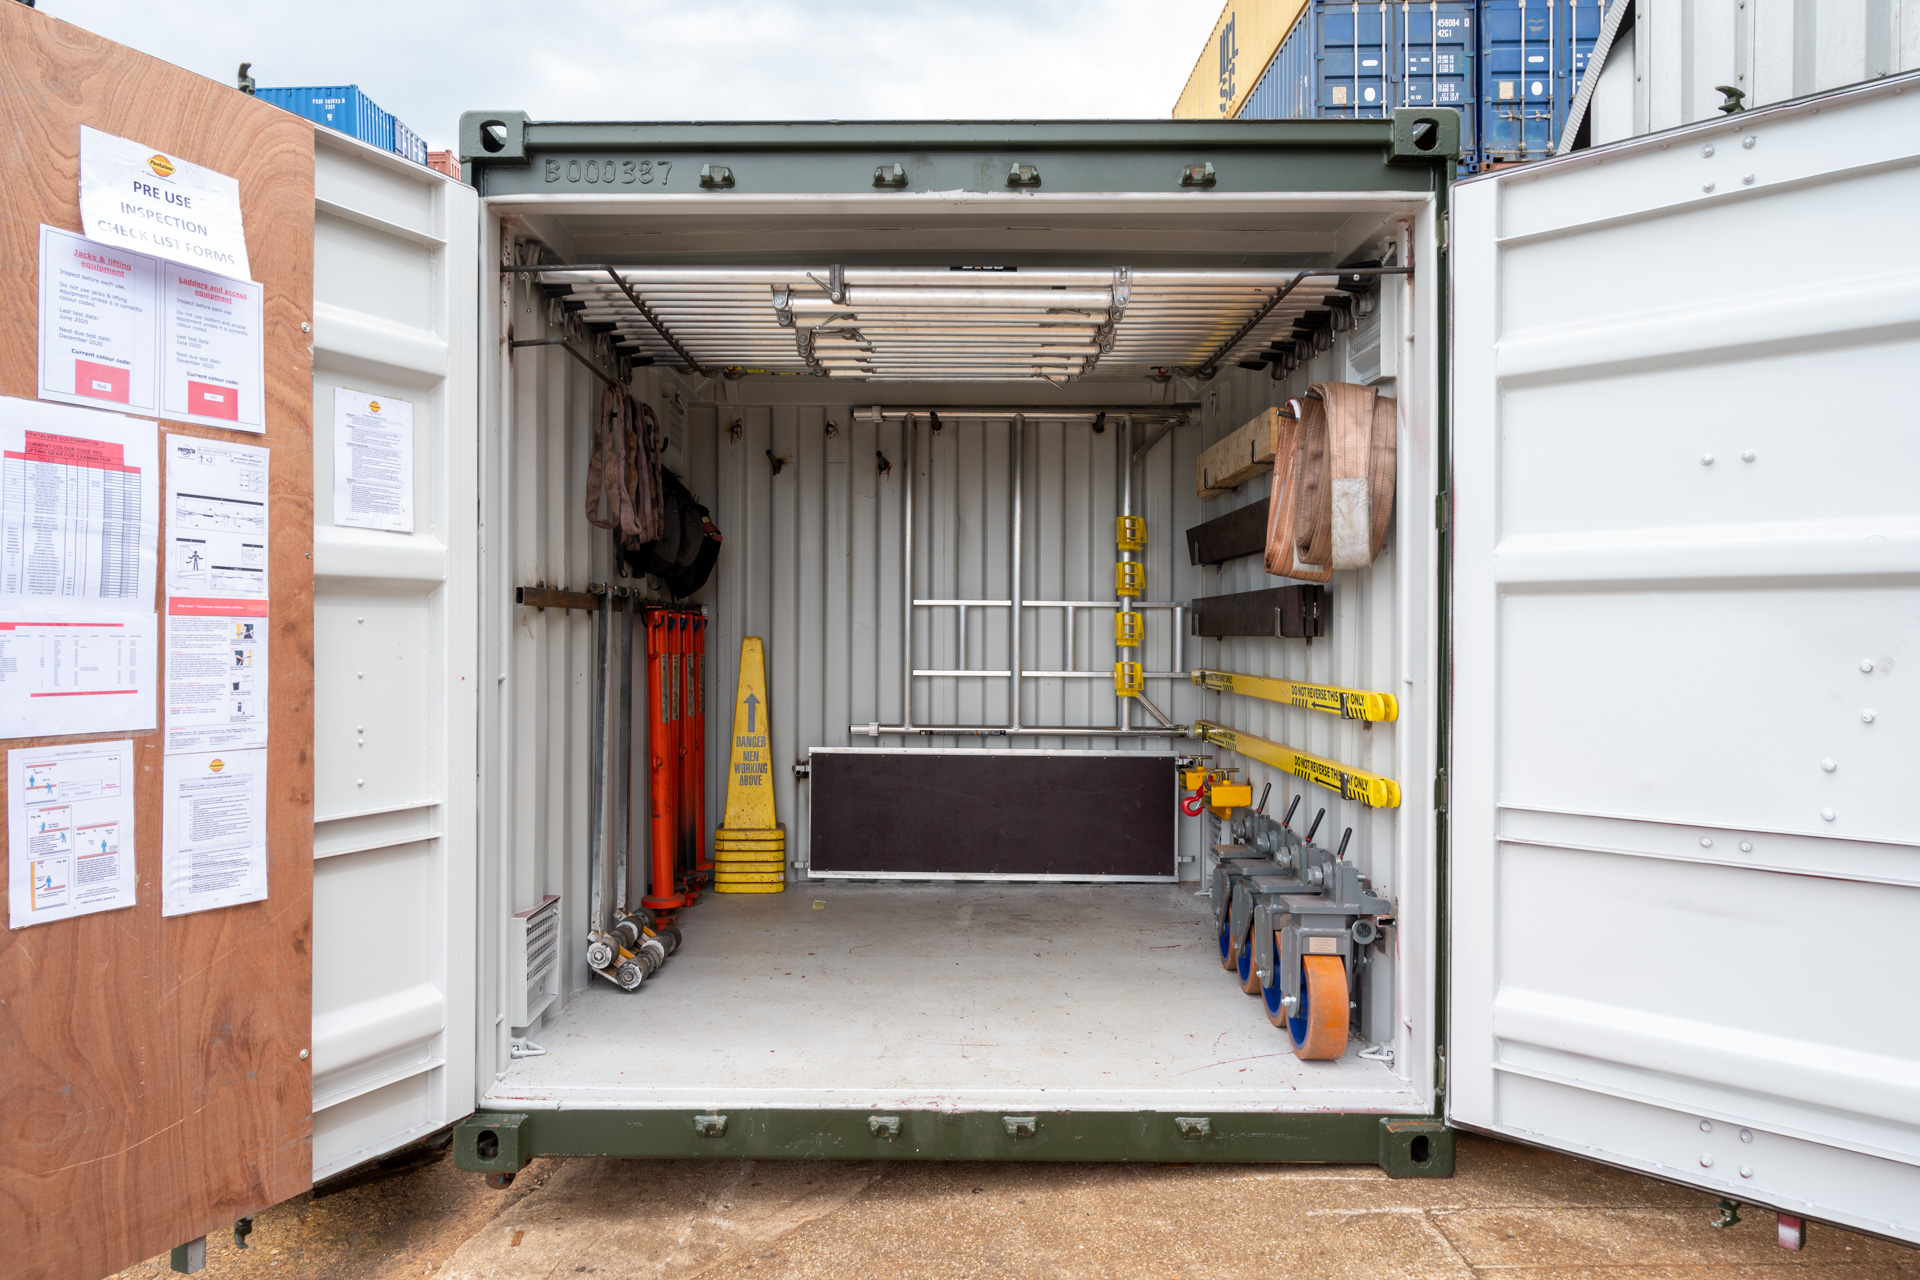 5 Reasons Shipping Containers Make Great Storage